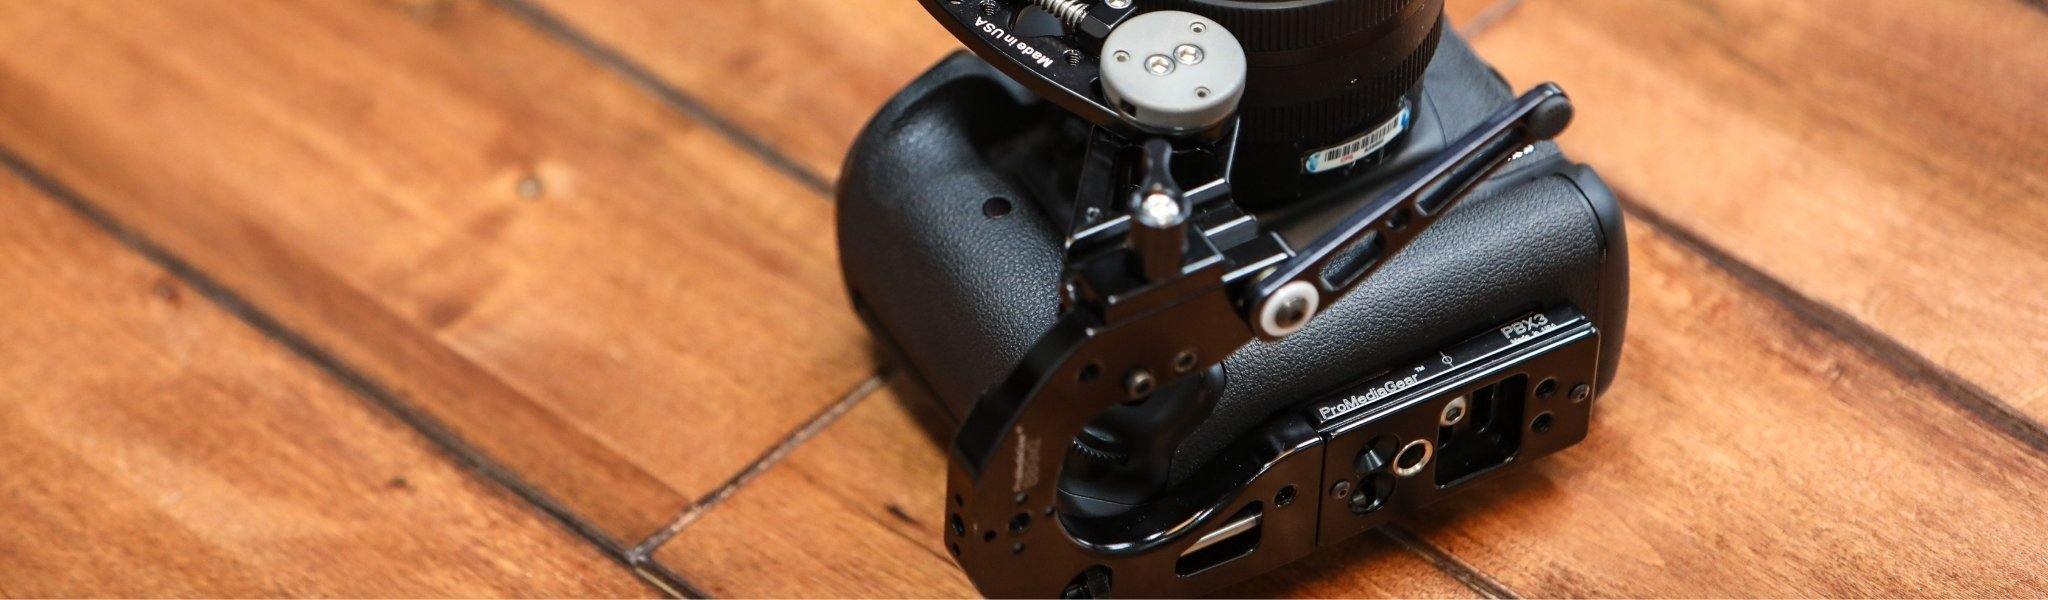 Arca Plates for DSLR and Mirrorless Cameras | ProMediaGear